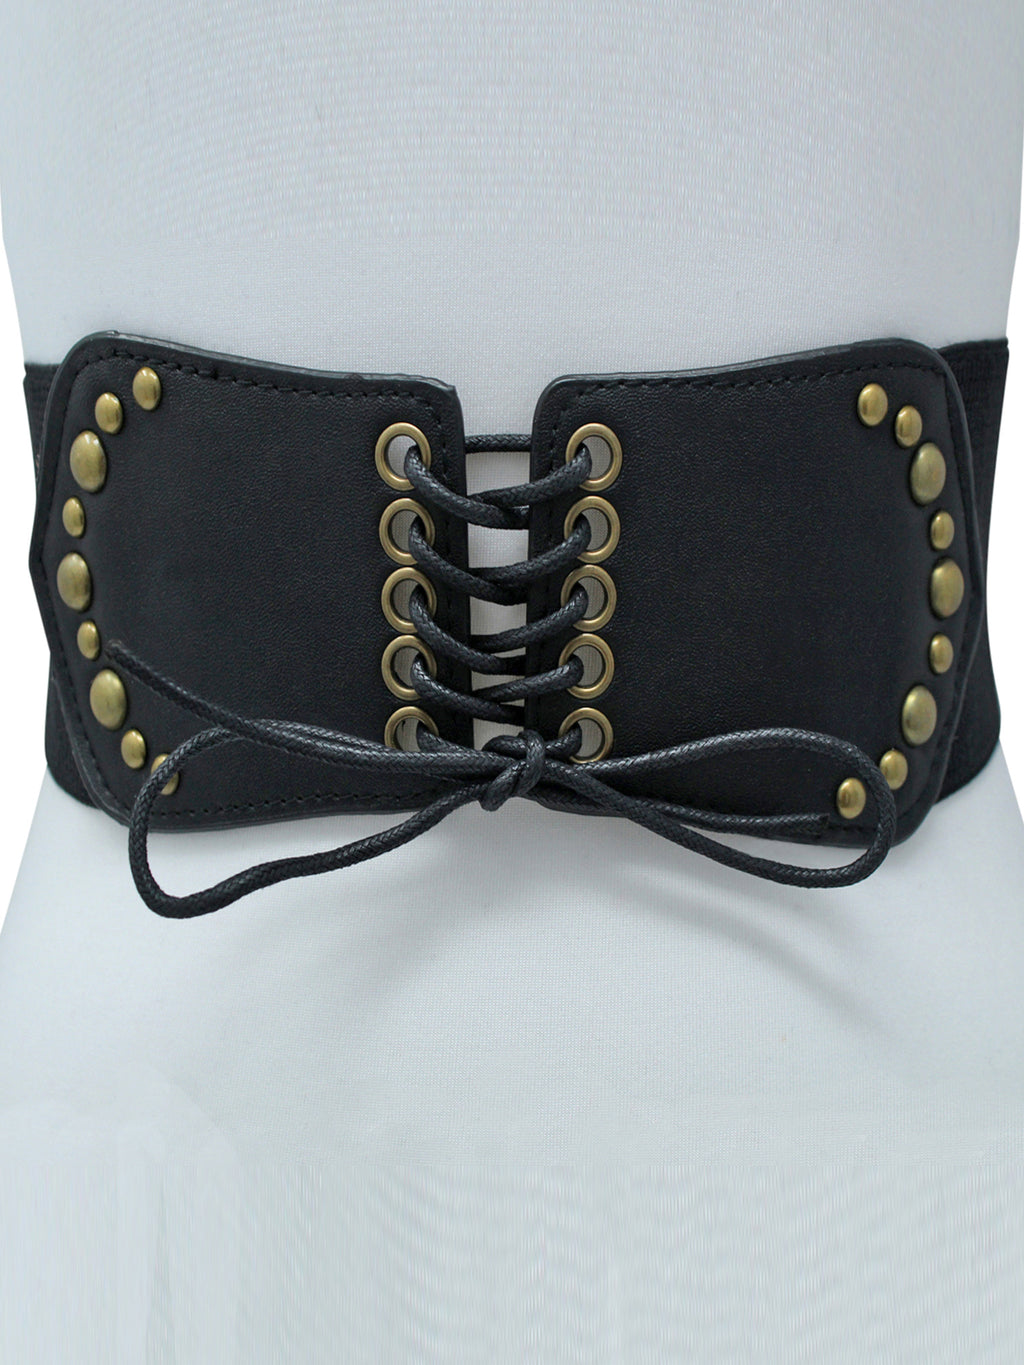 Corset Style Black Stretch Waist Belt With Gold Rivets